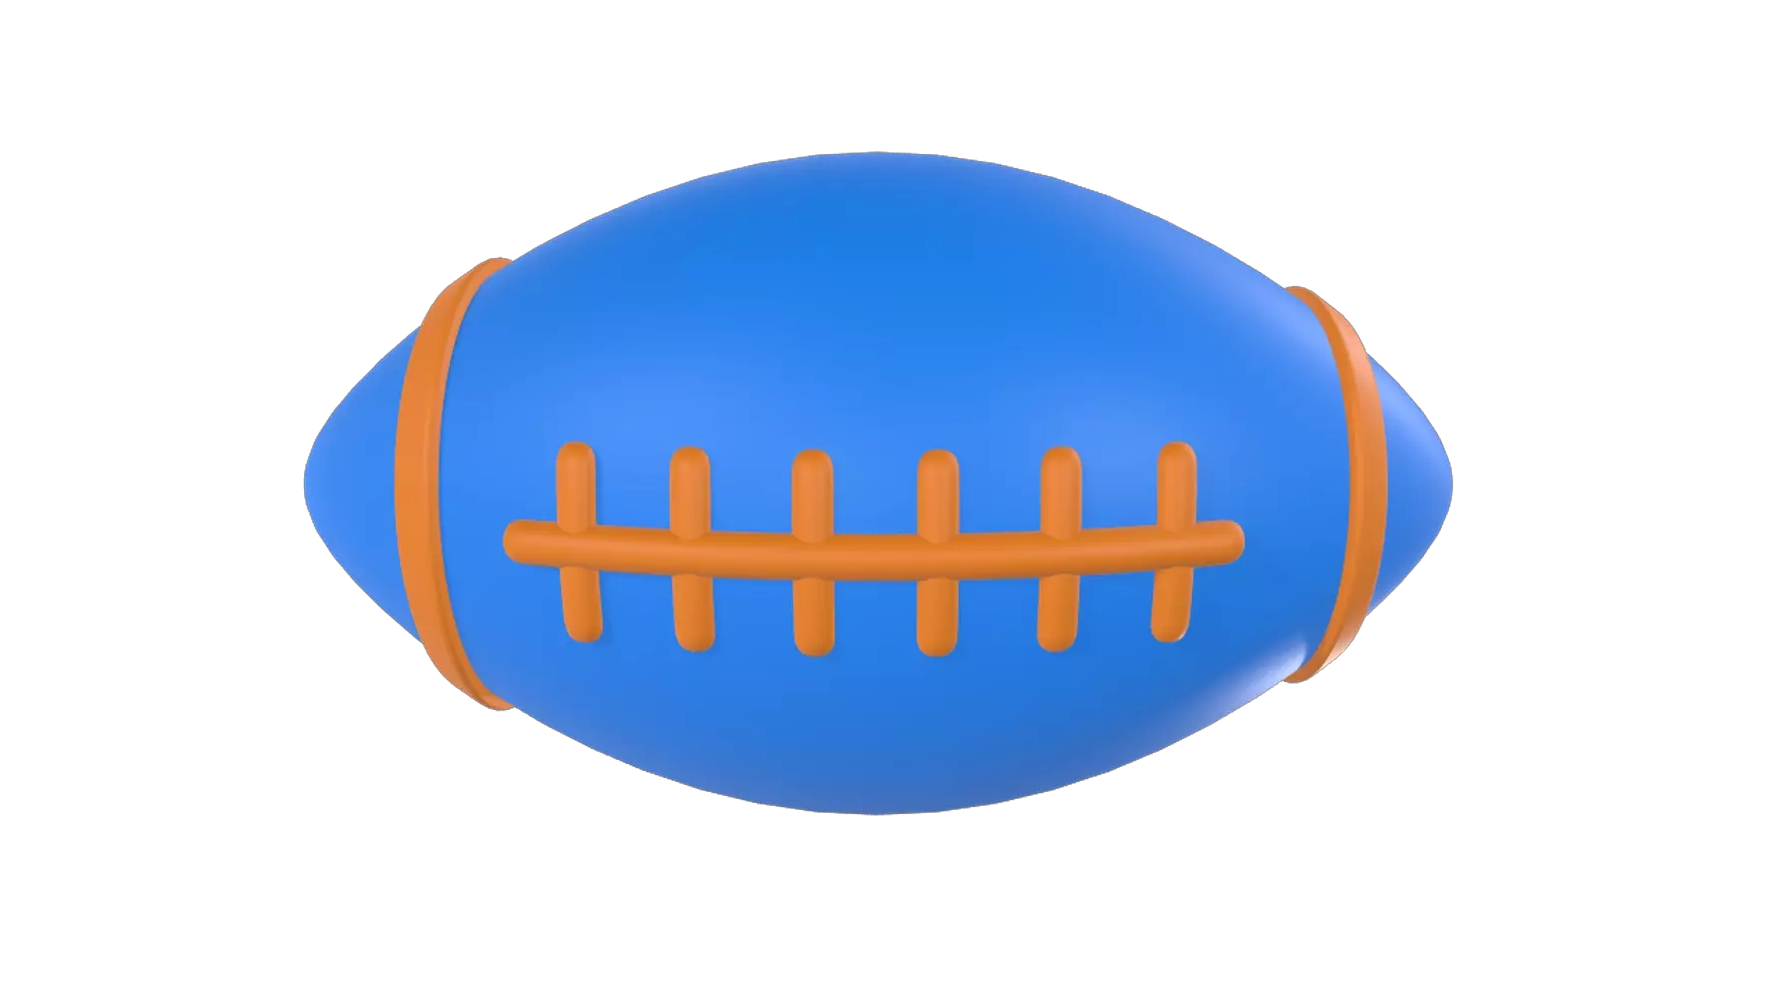 American Football 3D Graphic